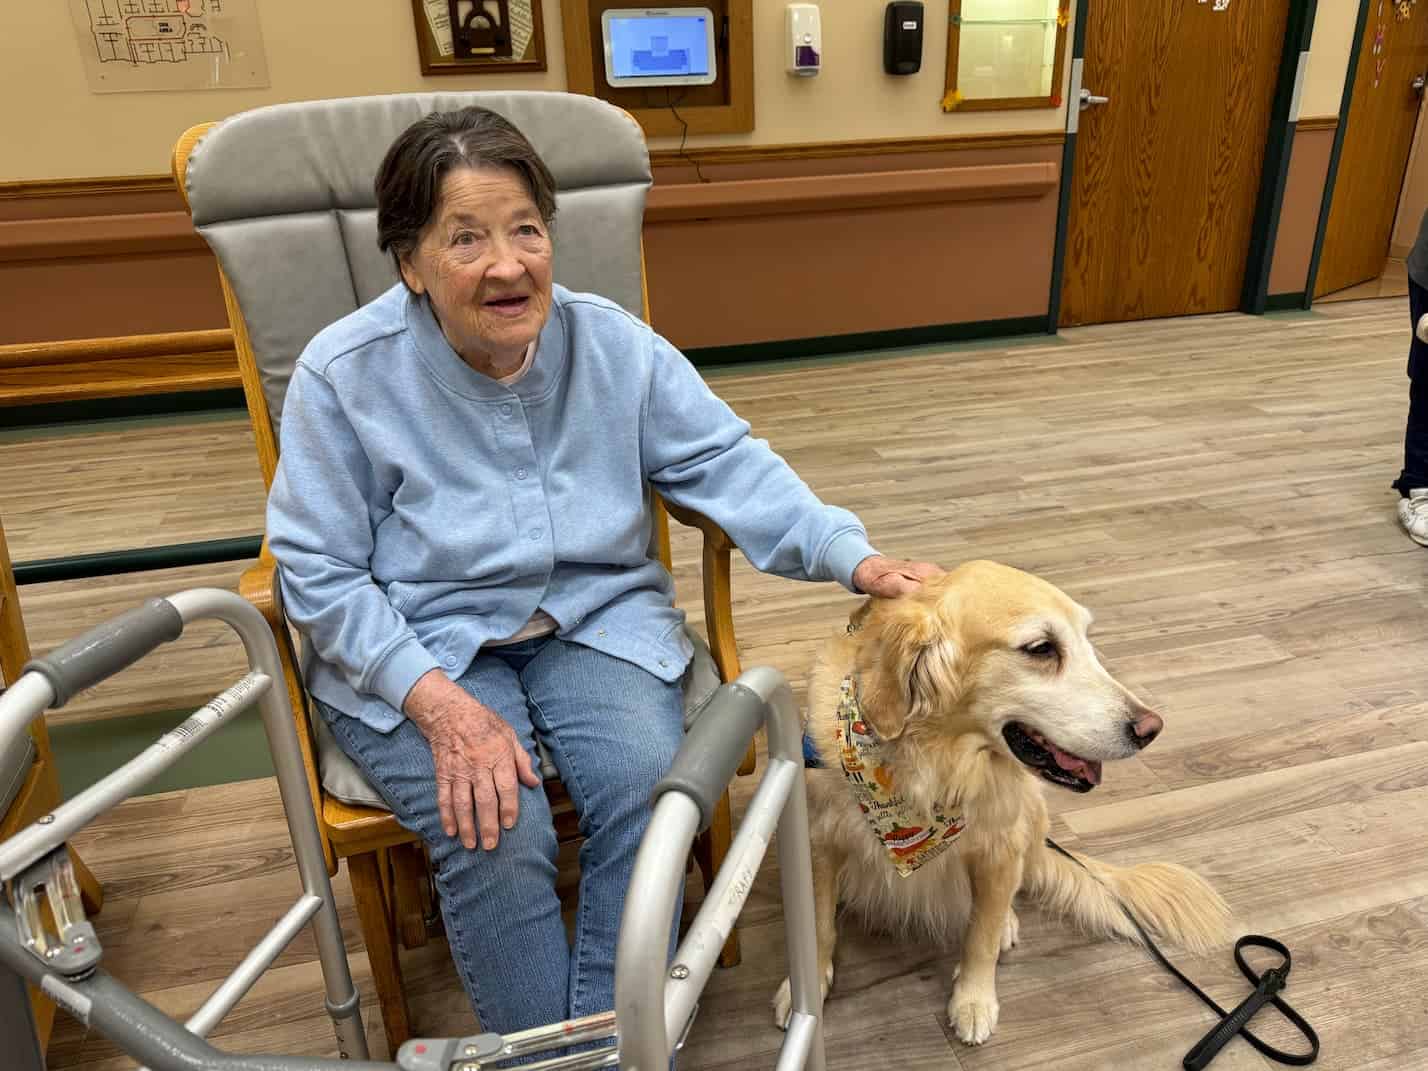 Elderly woman with therapy dog indoors.